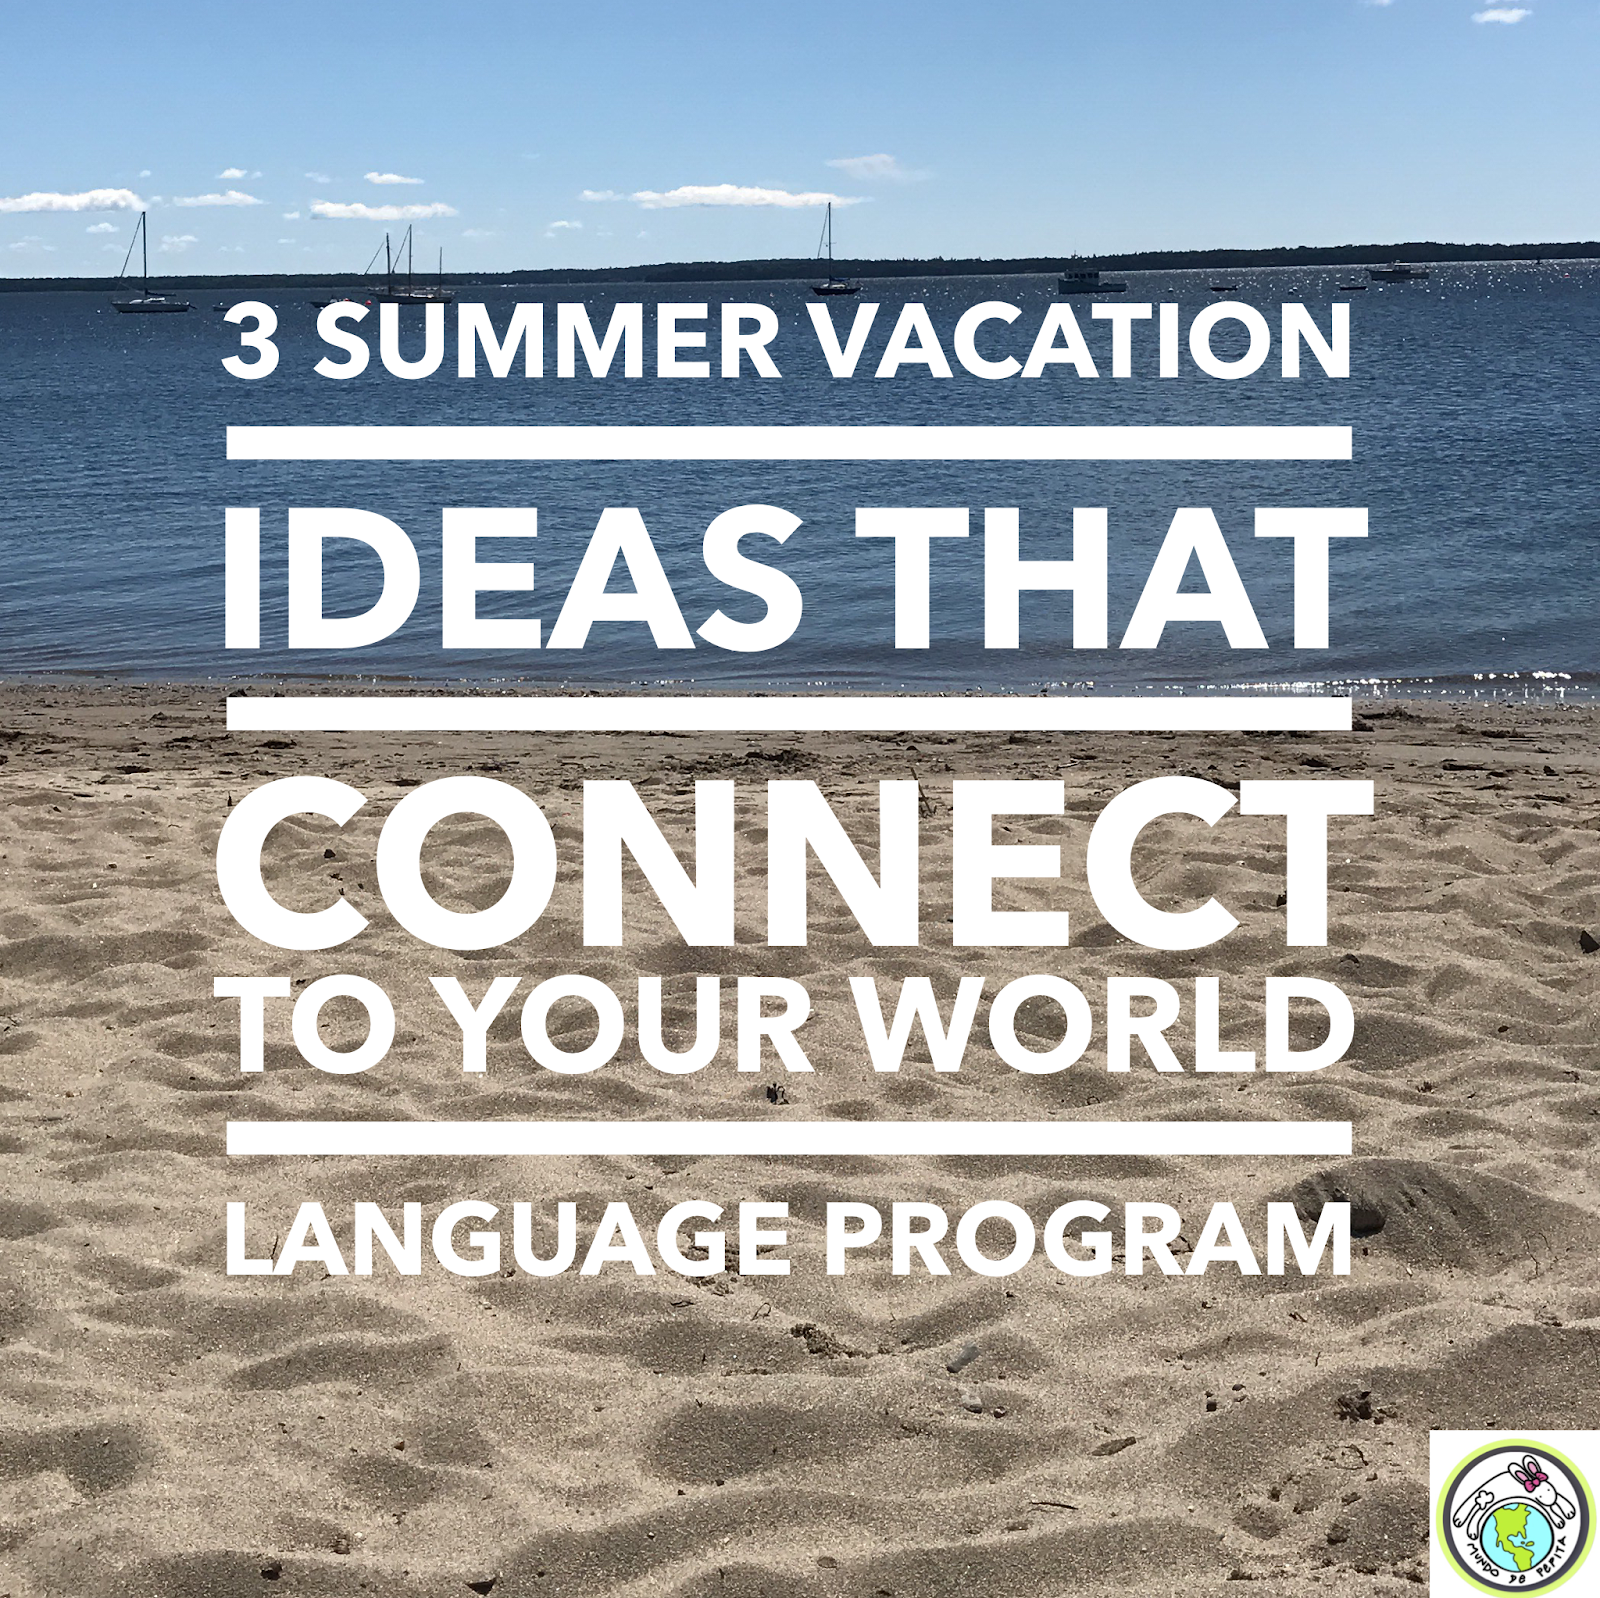 uno, dos, tres summer vacation activities for families that connect